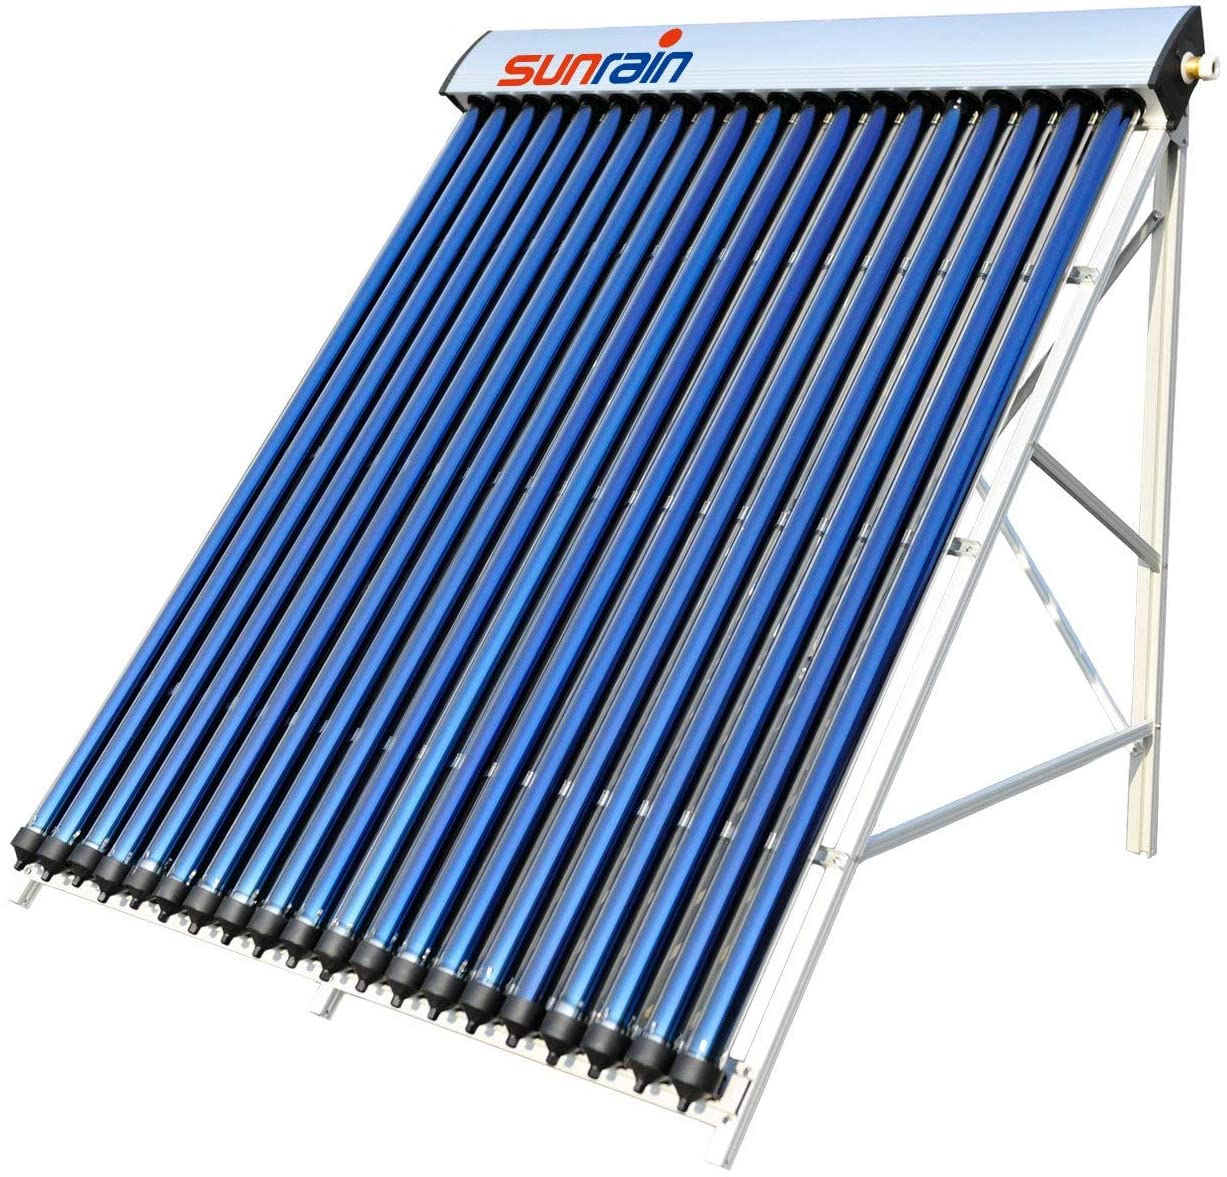 Northern Lights Group 30 Tube Solar Water Heater Collector